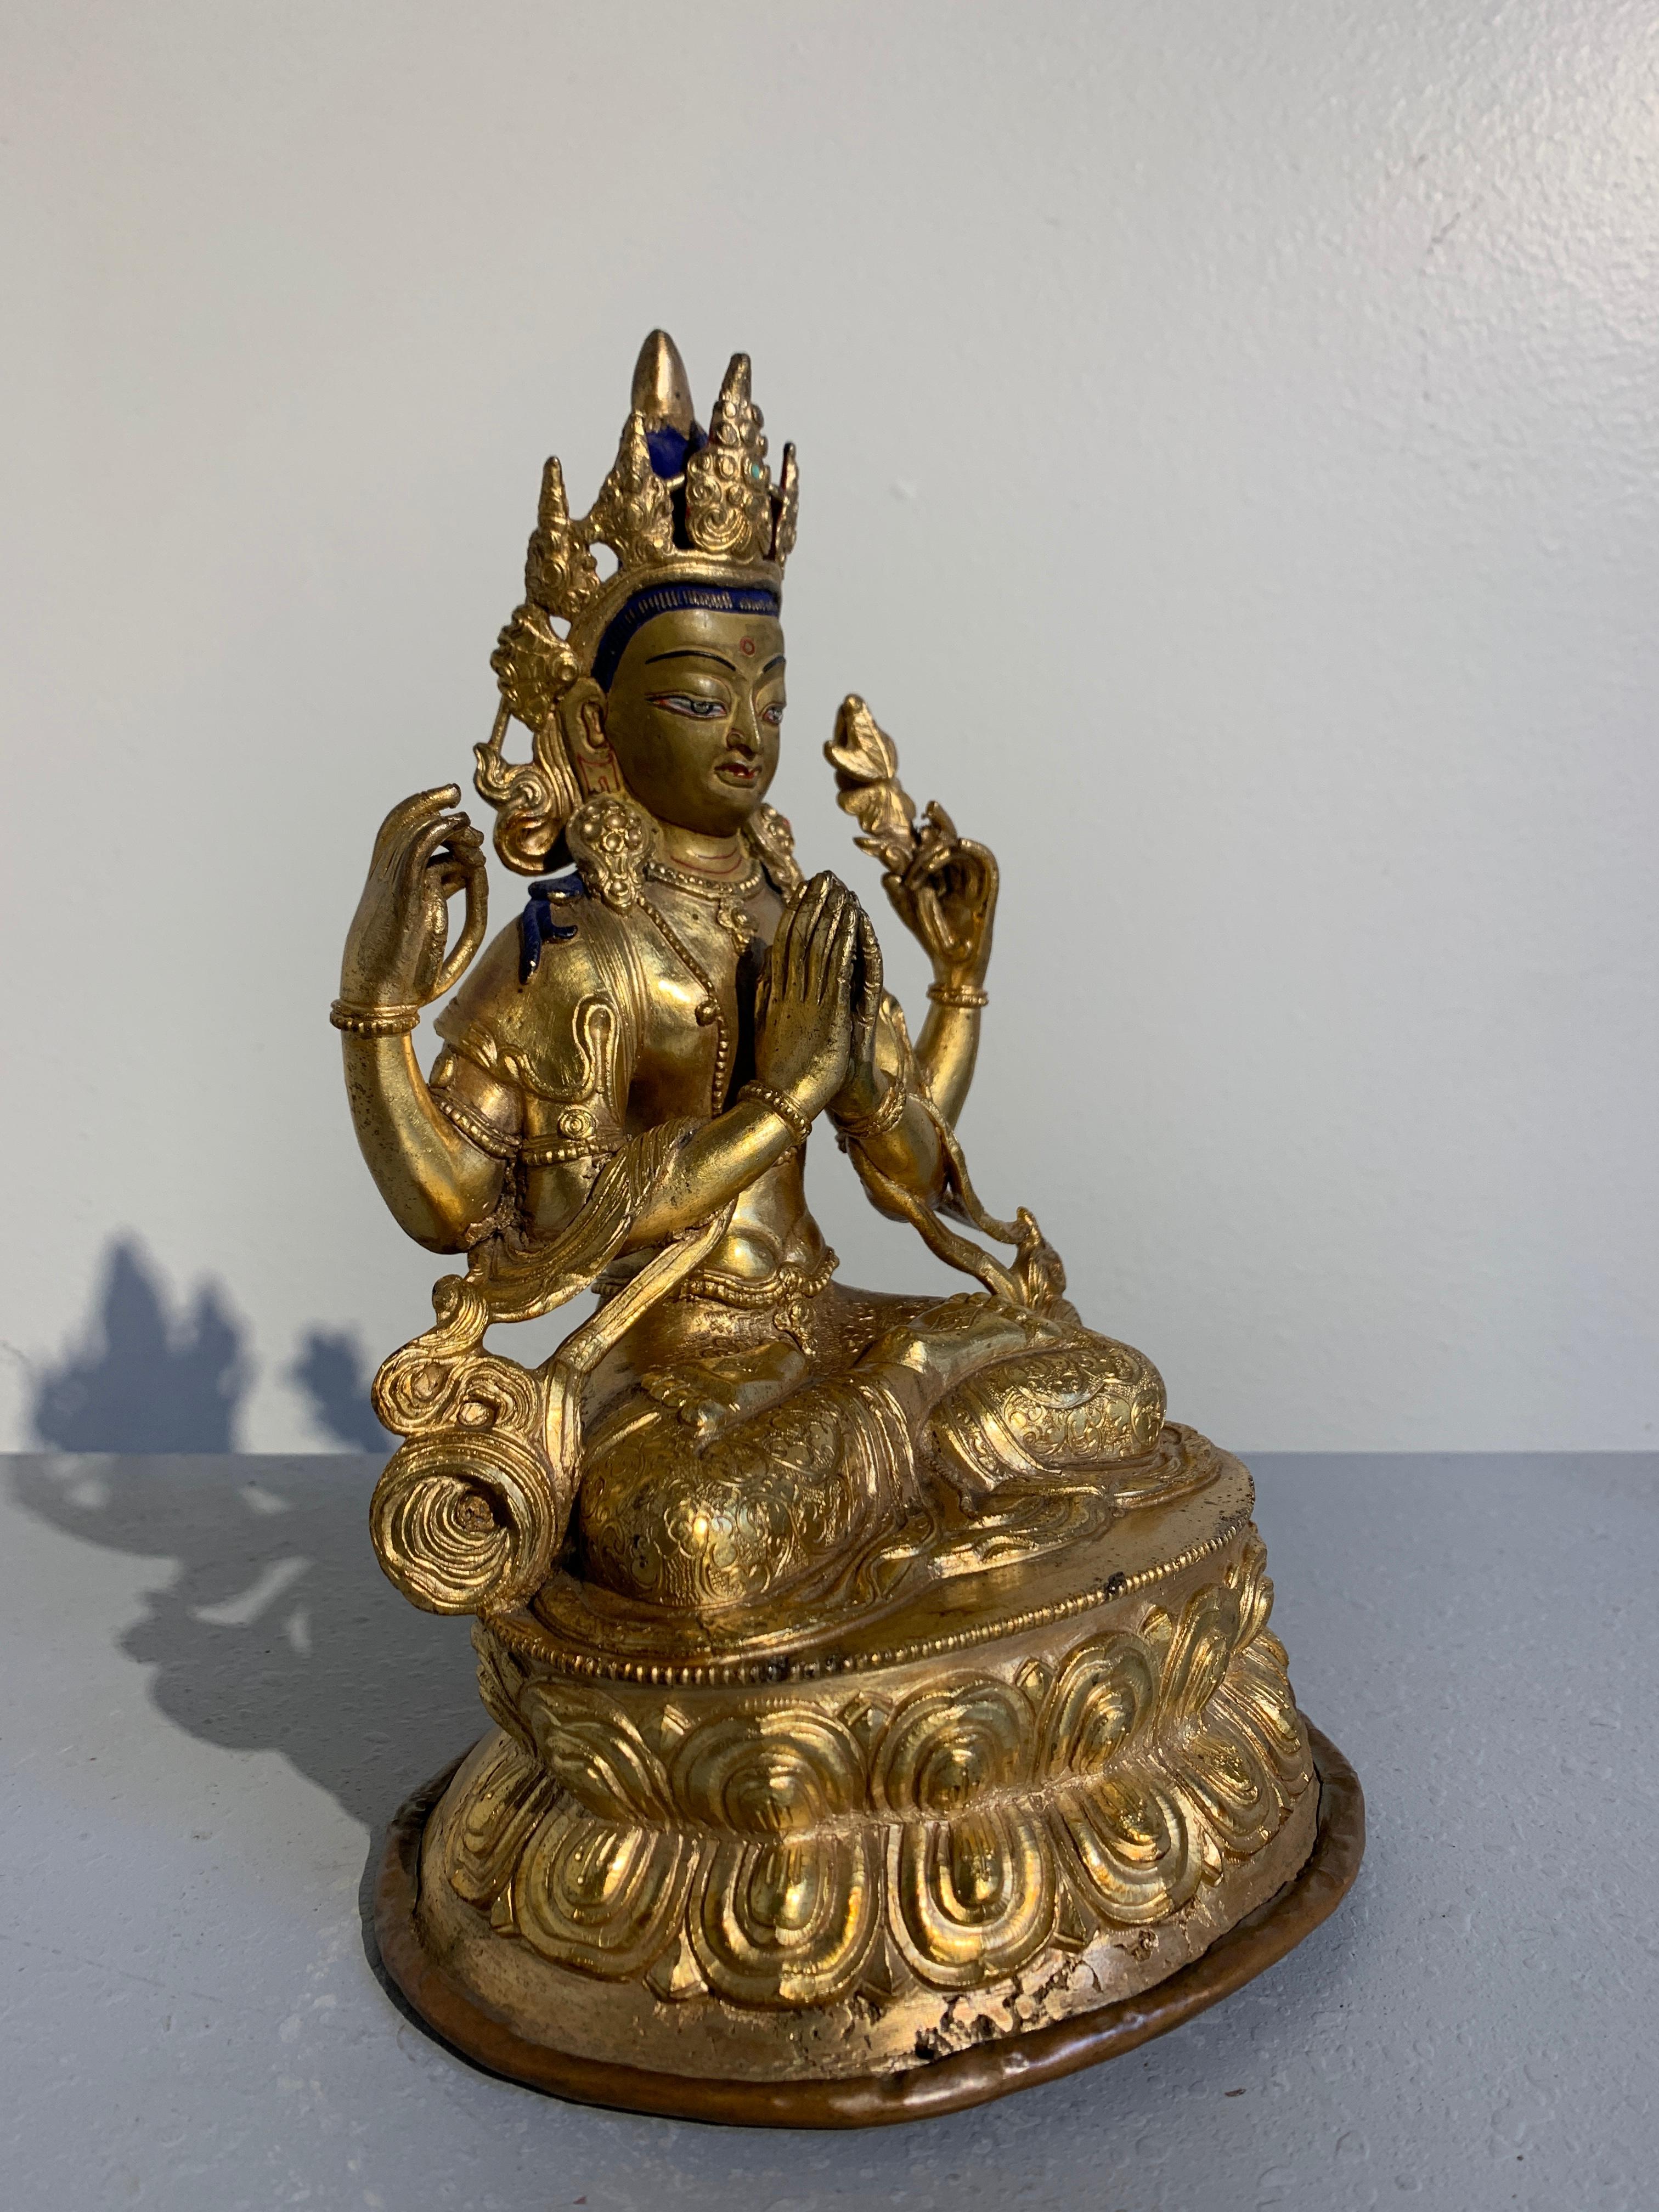 A nice vintage early to mid-20th century gilt bronze sculpture of the Buddhist deity Avalokiteshvara in his four armed form, known as Chaturbuhja, or Chenrezig in Tibet.

Chenrezig, a form of Avalokiteshvara, the bodhisattva of compassion (known